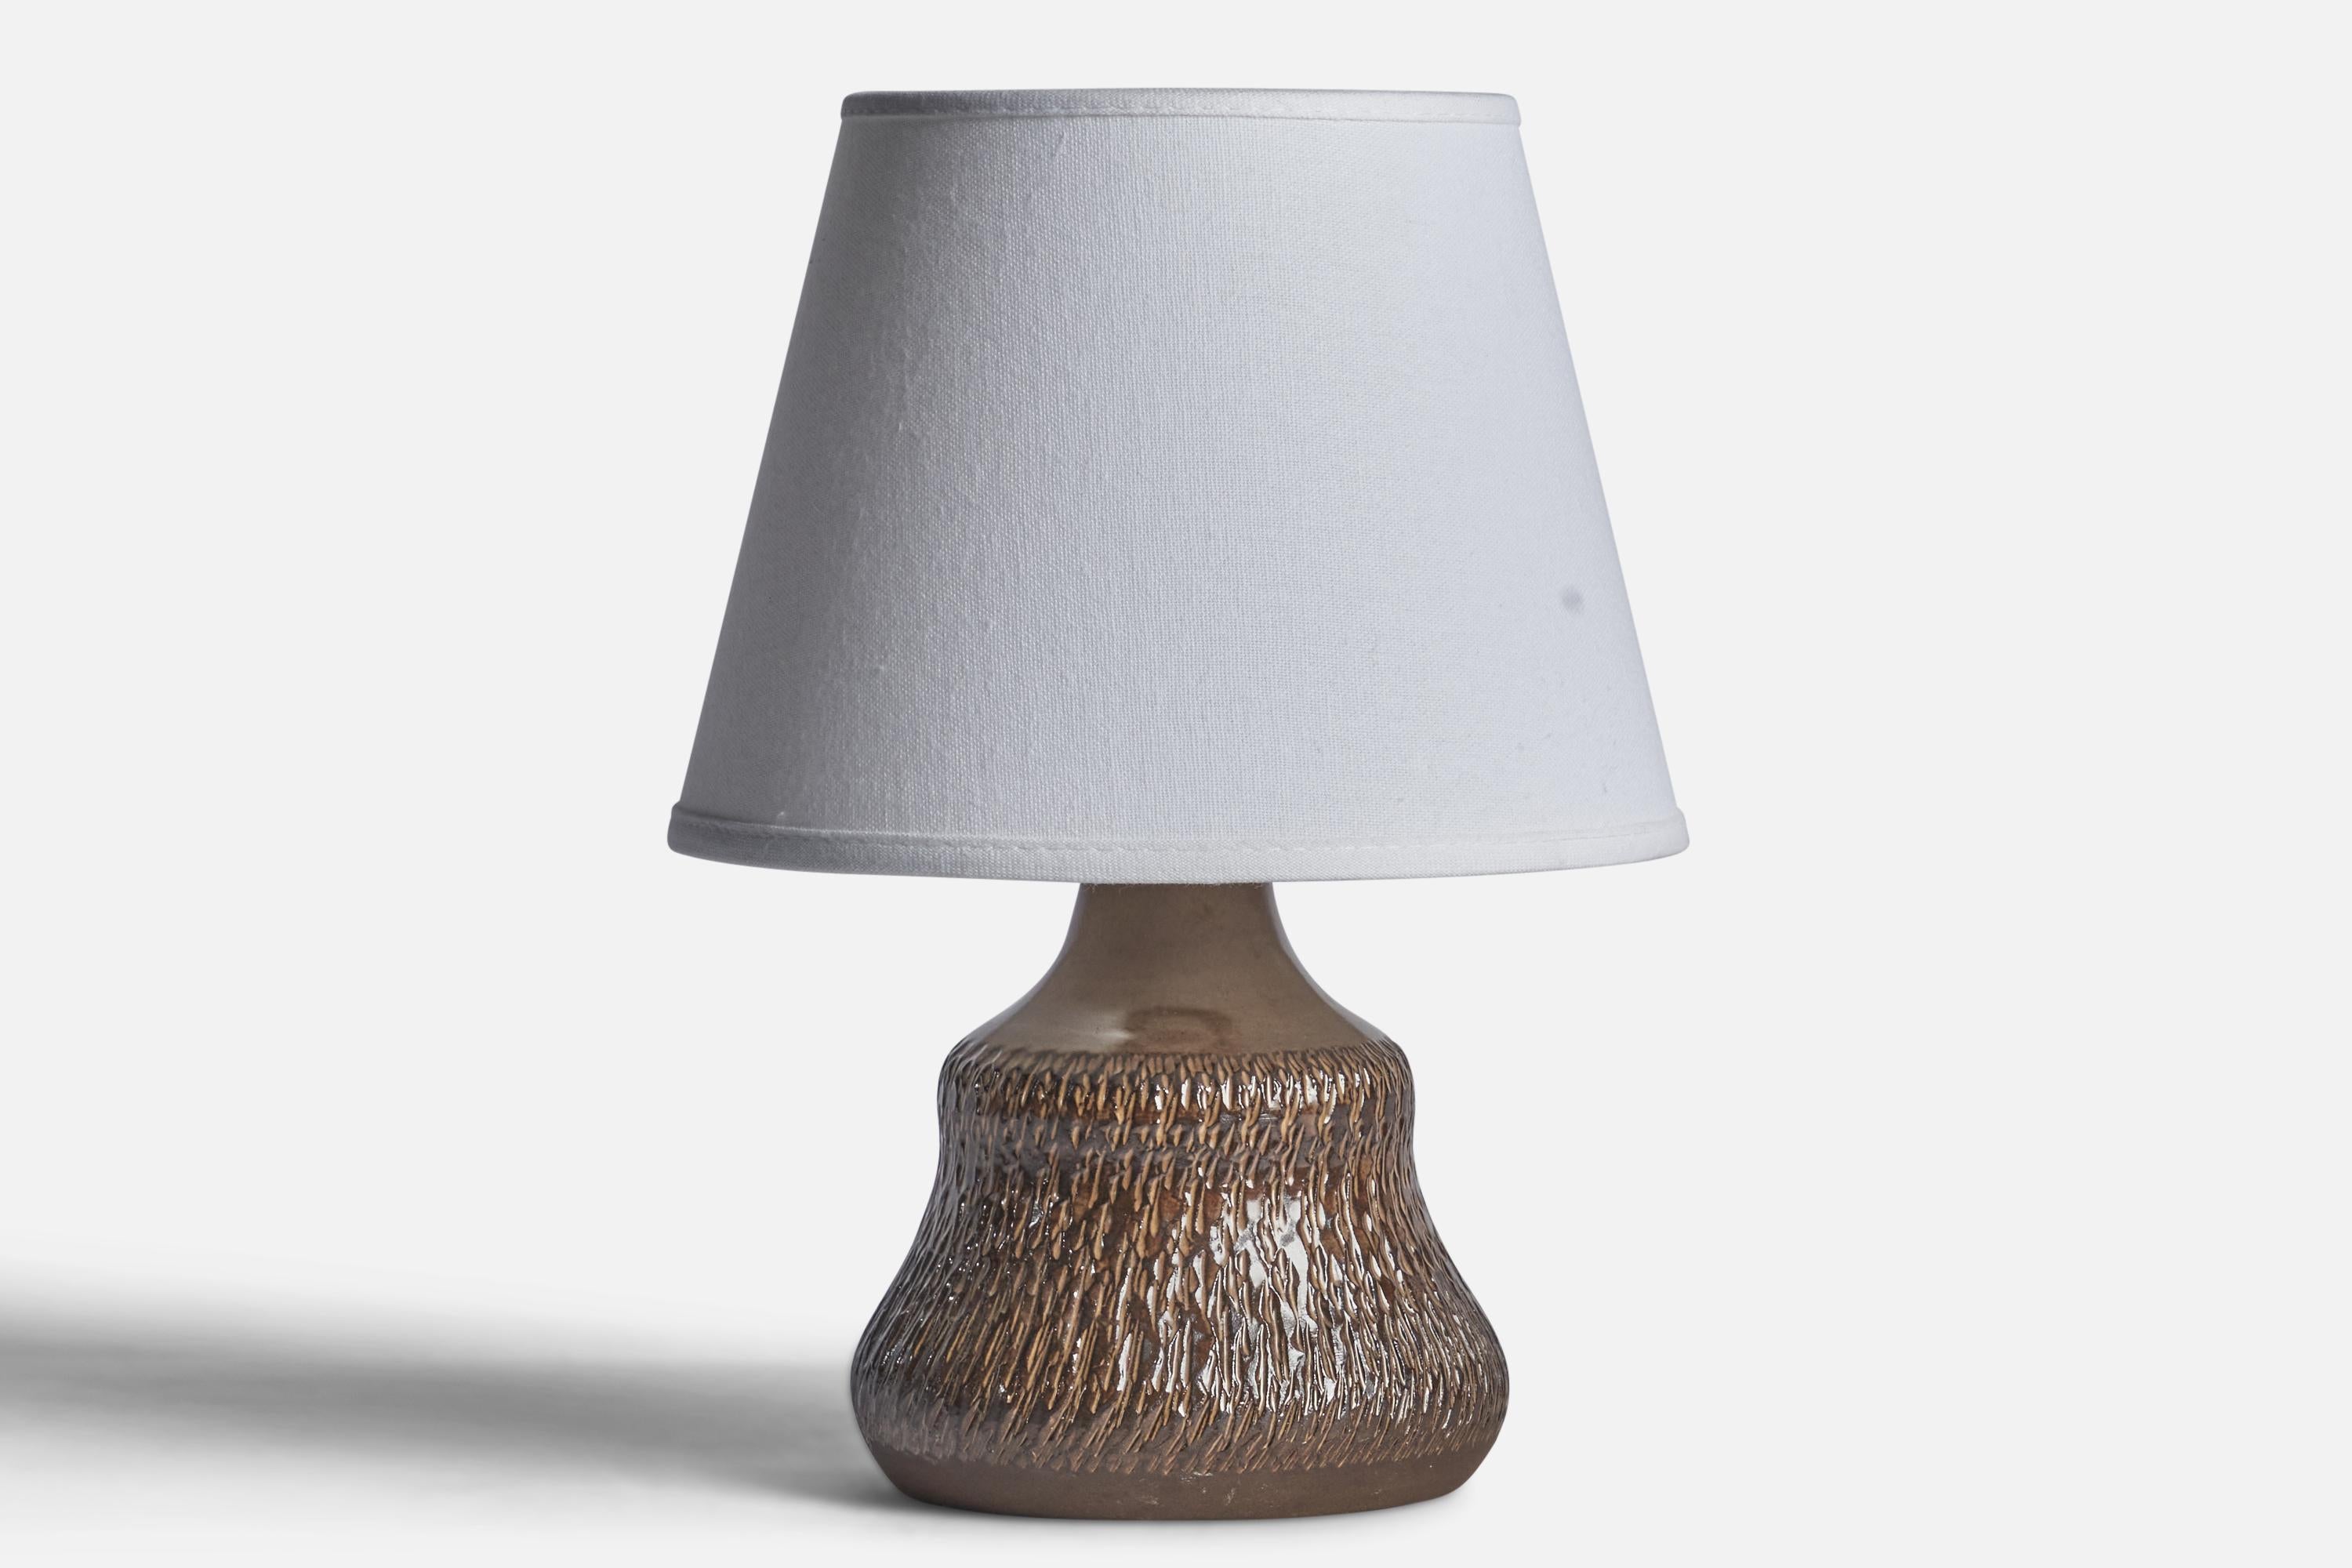 A small brown-glazed stoneware table lamp designed and produced by Henry Brandi, Vejbystrand, Sweden, c. 1960s.

Dimensions of Lamp (inches): 8.5” H x 5.25” Diameter
Dimensions of Shade (inches): 5” Top Diameter x 8” Bottom Diameter x 6” H